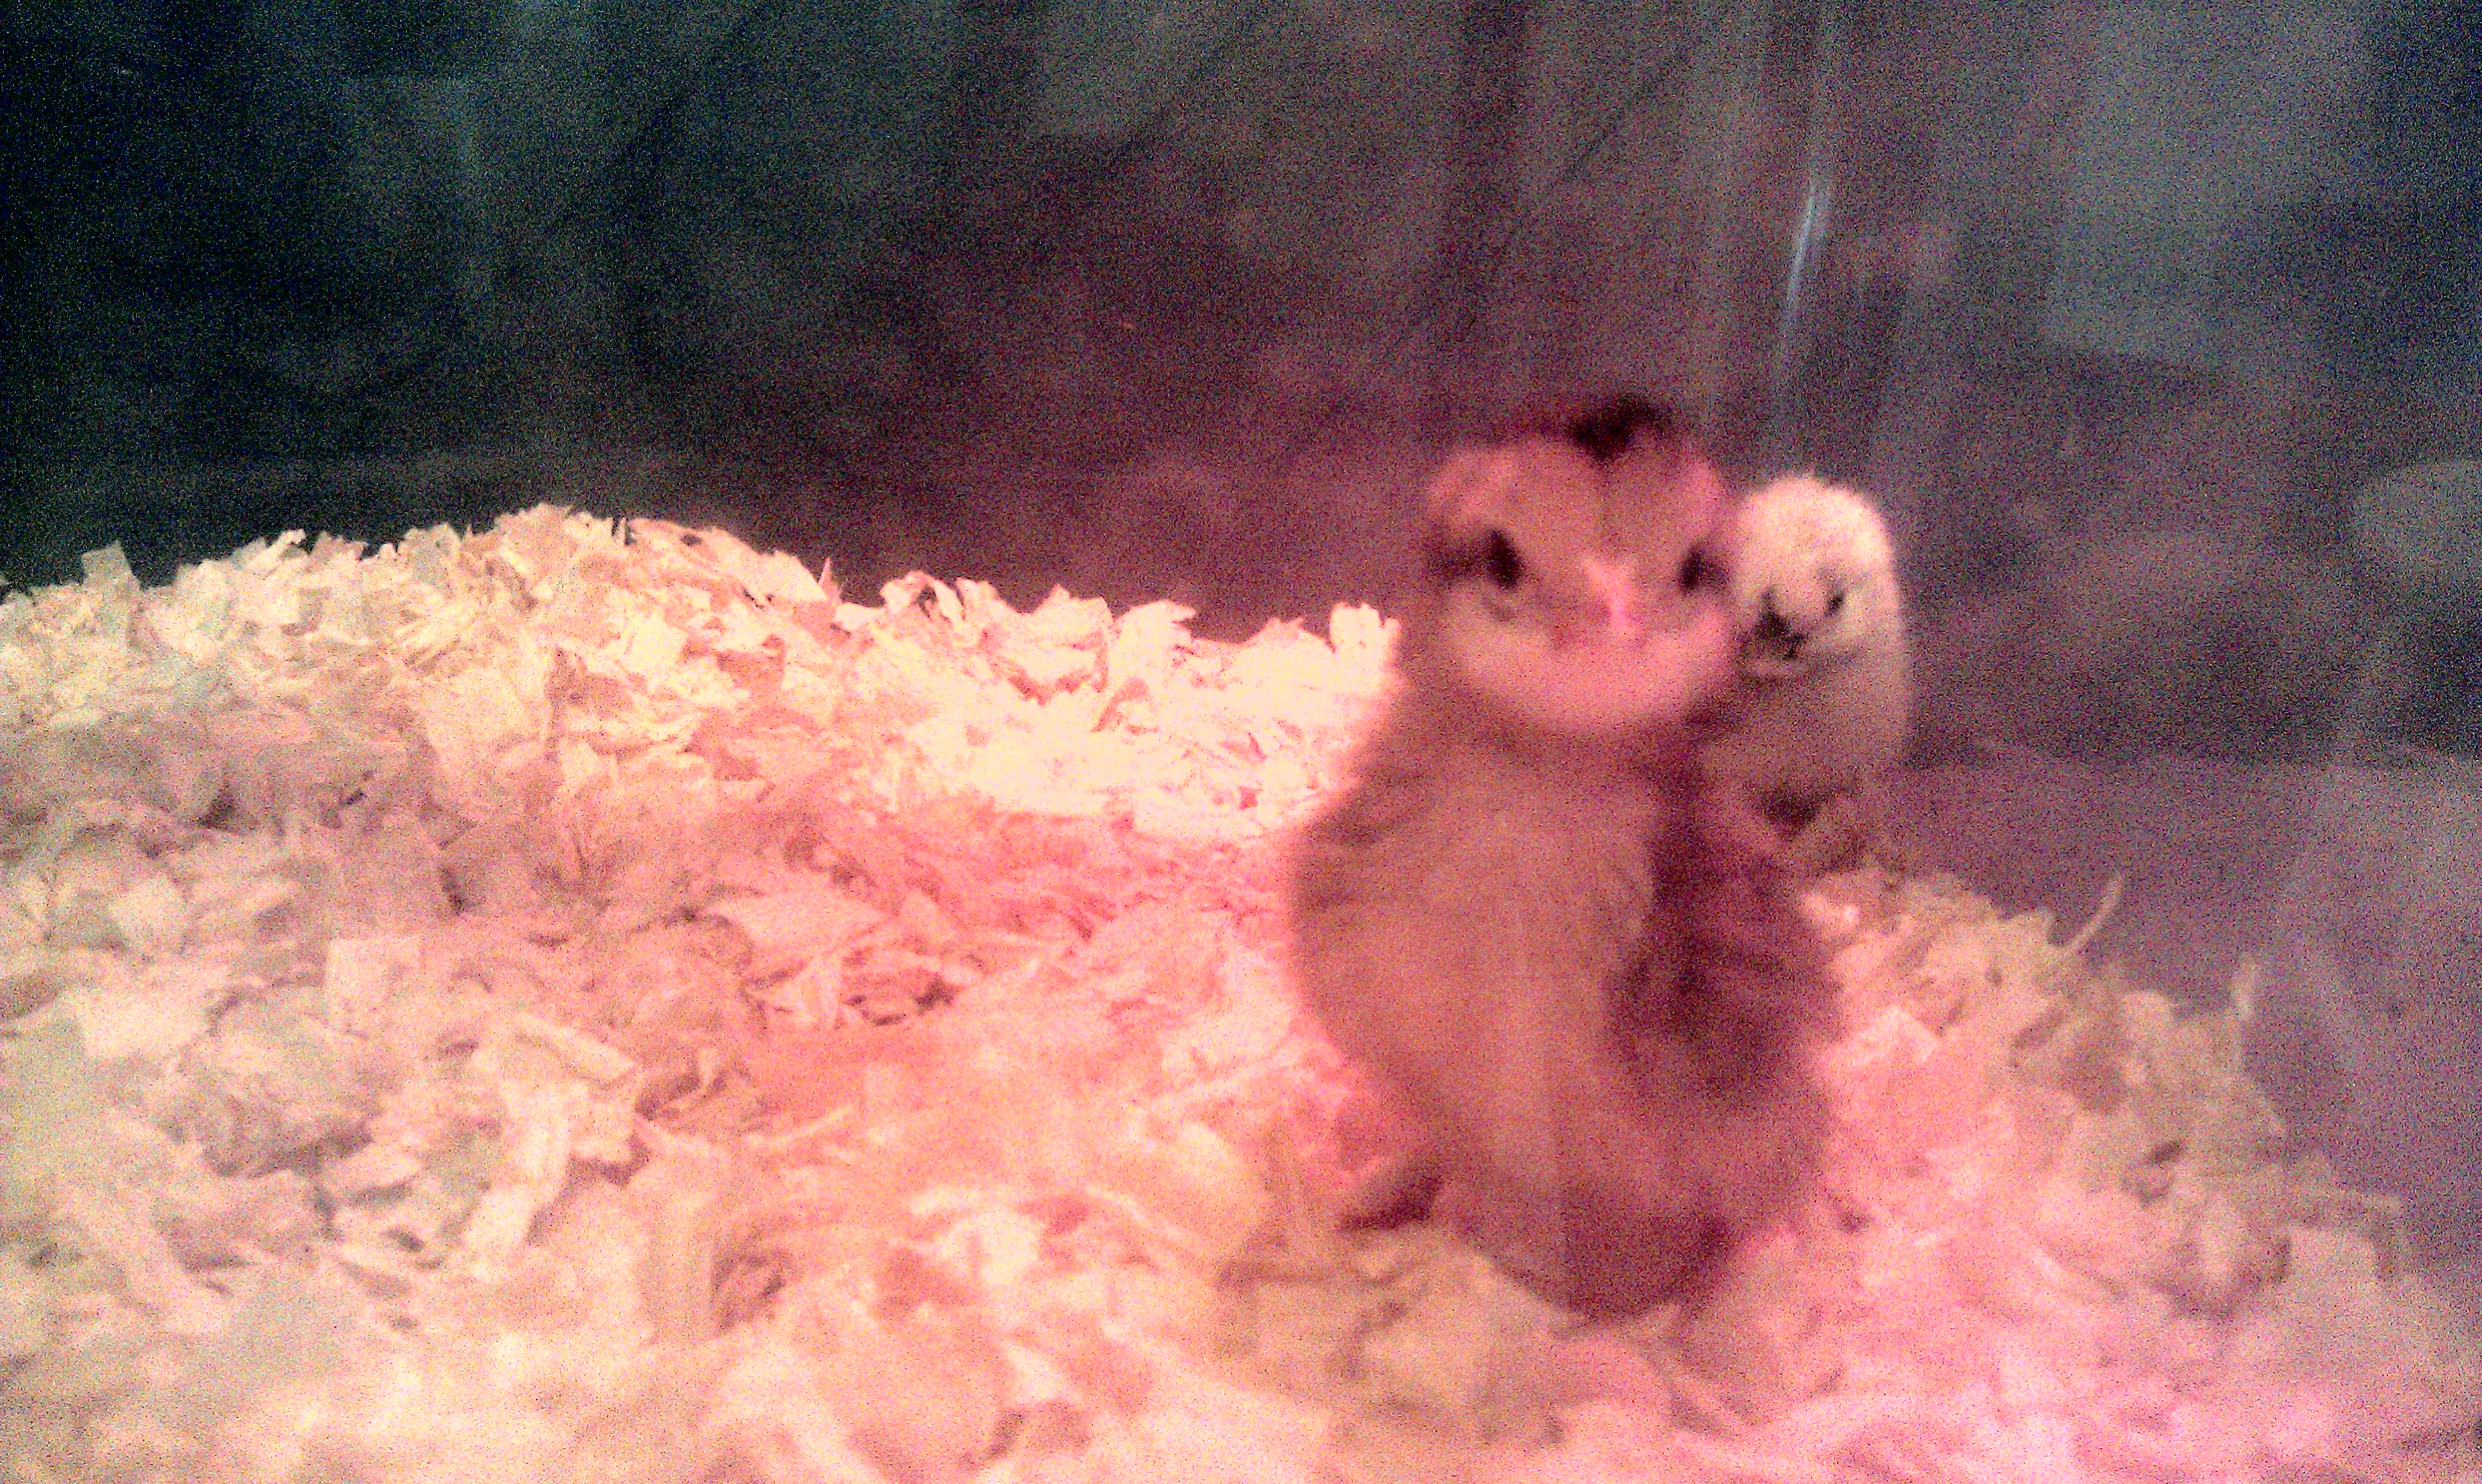 Summer 2014. Awe, Chucky. So cute, sweet & innocent. 5 wks later he's a little terror/knight in shining armor! Upon his first meeting with our spring chicks who are now about 13wks old he promplty strutted up to them, did a little chicken wing dance & chased them off! He & his silkies moved in with them in the "chick coop" & he's been ruling the roost ever since. The spring chicks are quadruple his size but they're so confused & intimidated by his huge personality & tiny body that they pretty much avoid him & the silkies, lol!